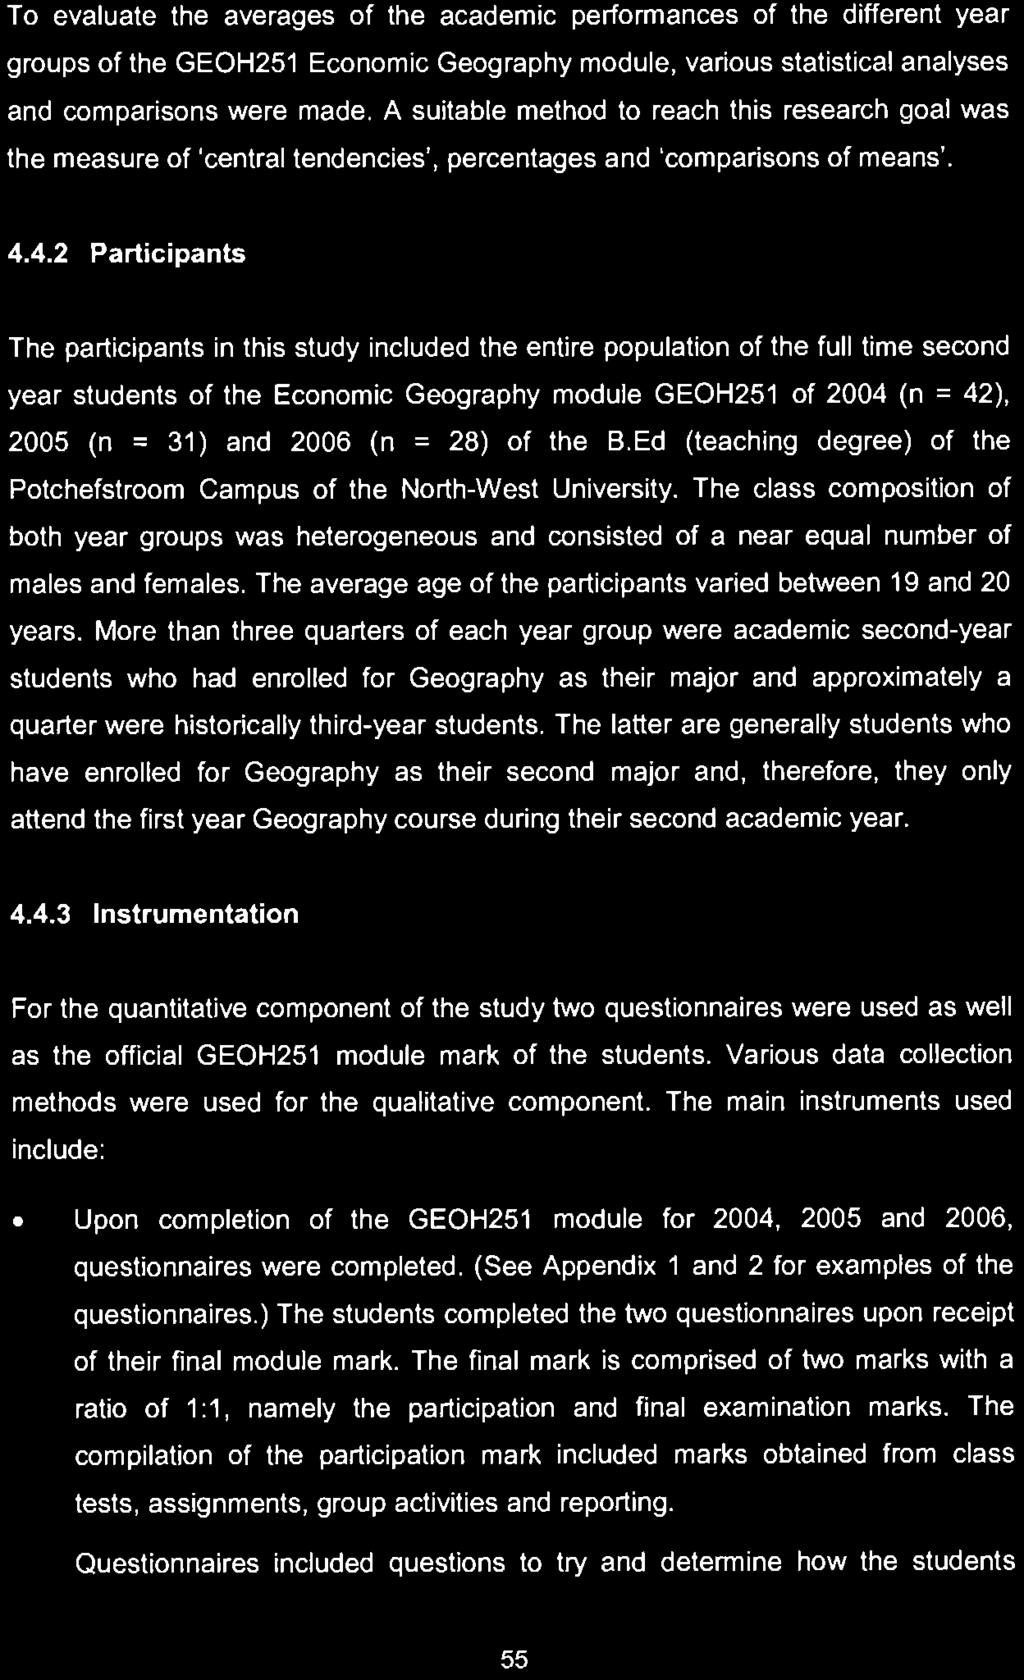 4.2 Participants The participants In this study included the entire population of the full time second year students of the Economic Geography module GEOH251 of 2004 (n = 42), 2005 (n = 31) and 2006